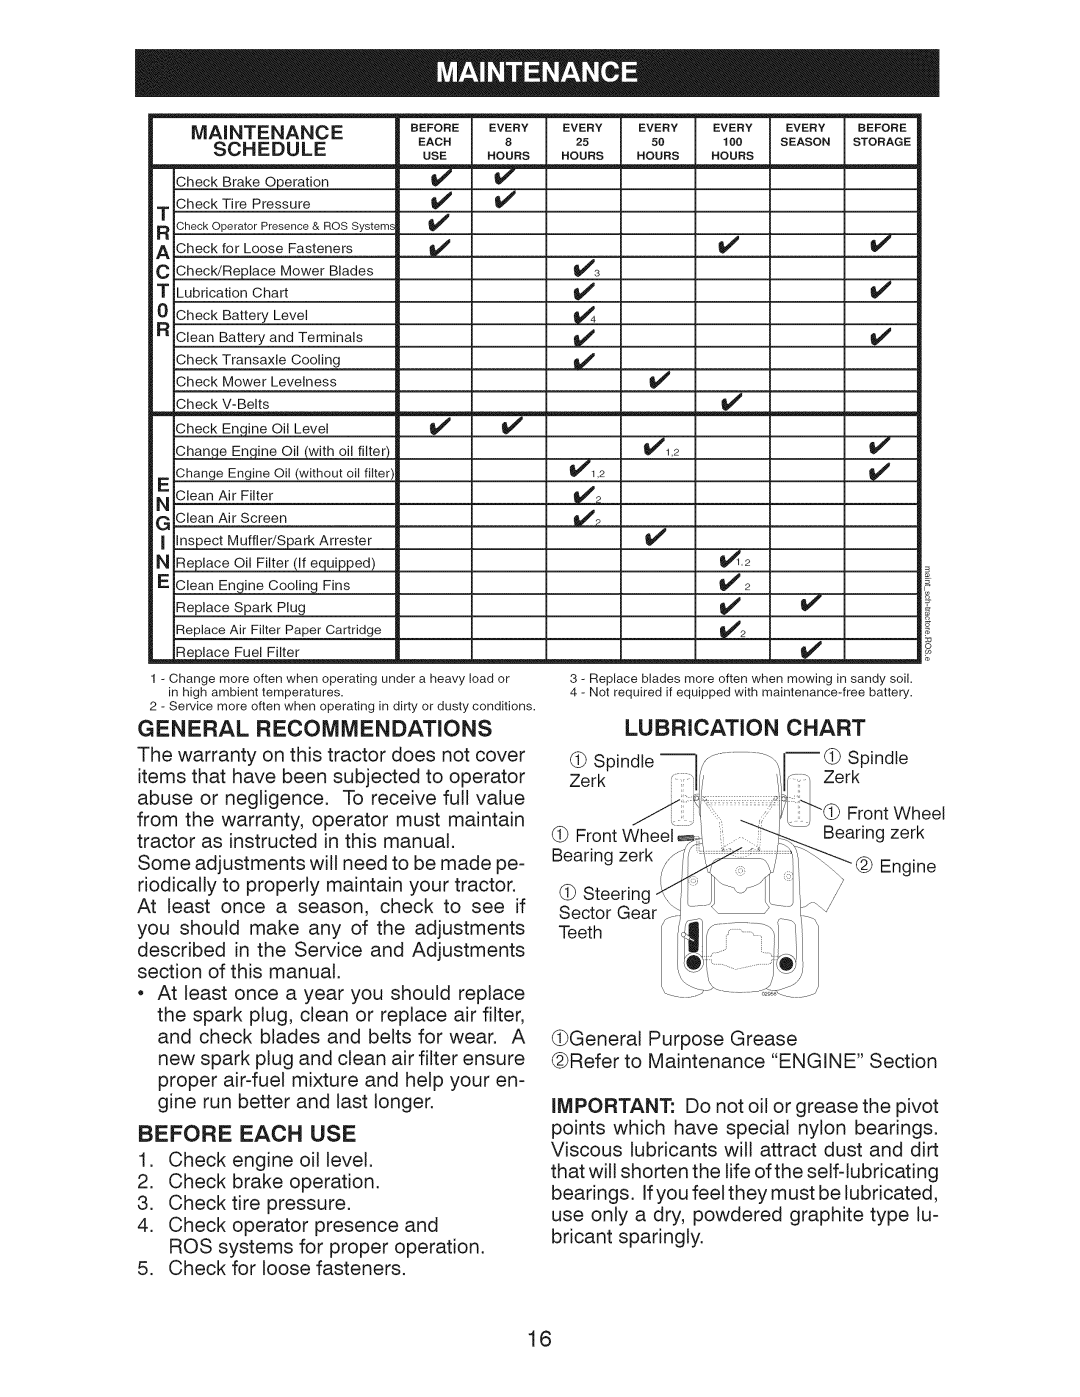 Craftsman 917.28922 owner manual v v2, General Recommendations, Before Each Use, Lubrication, Chart 